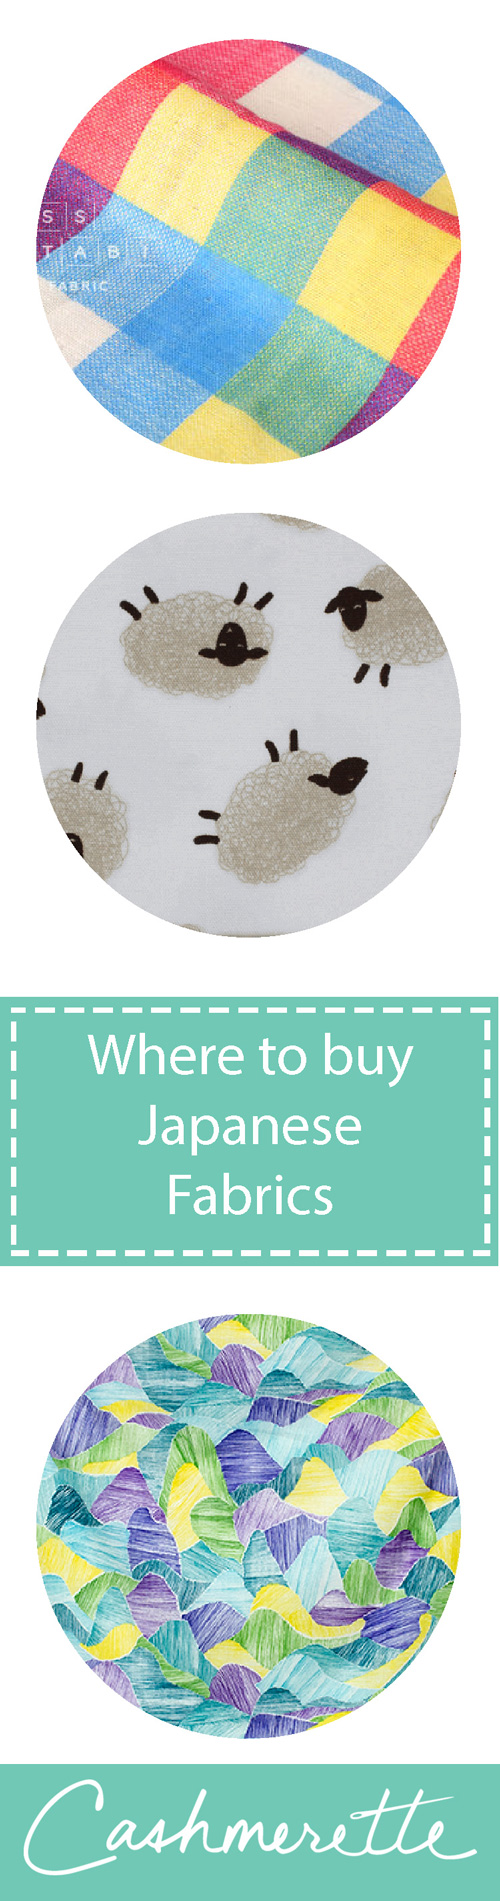 Where to buy Japanese fabric if you don't live in Japan! Gorgeous double gauze, Nani Iro cottons, seersucker, knits and more. Check out the Cashmerette fabric guide!